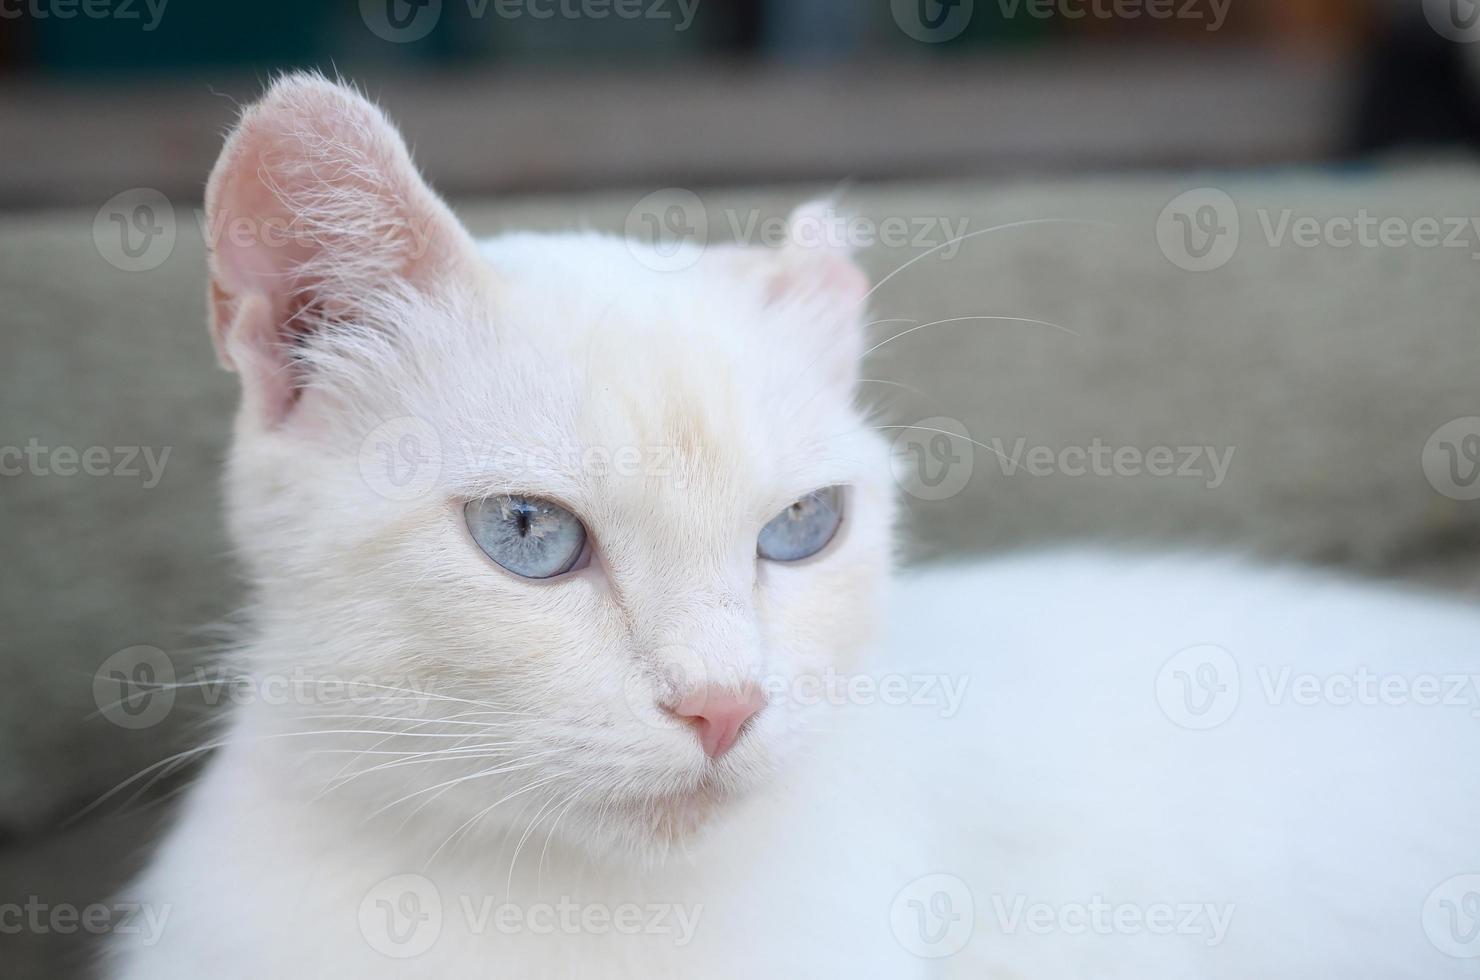 Pure white cat with turquoise blue eyes and pink defective ears photo